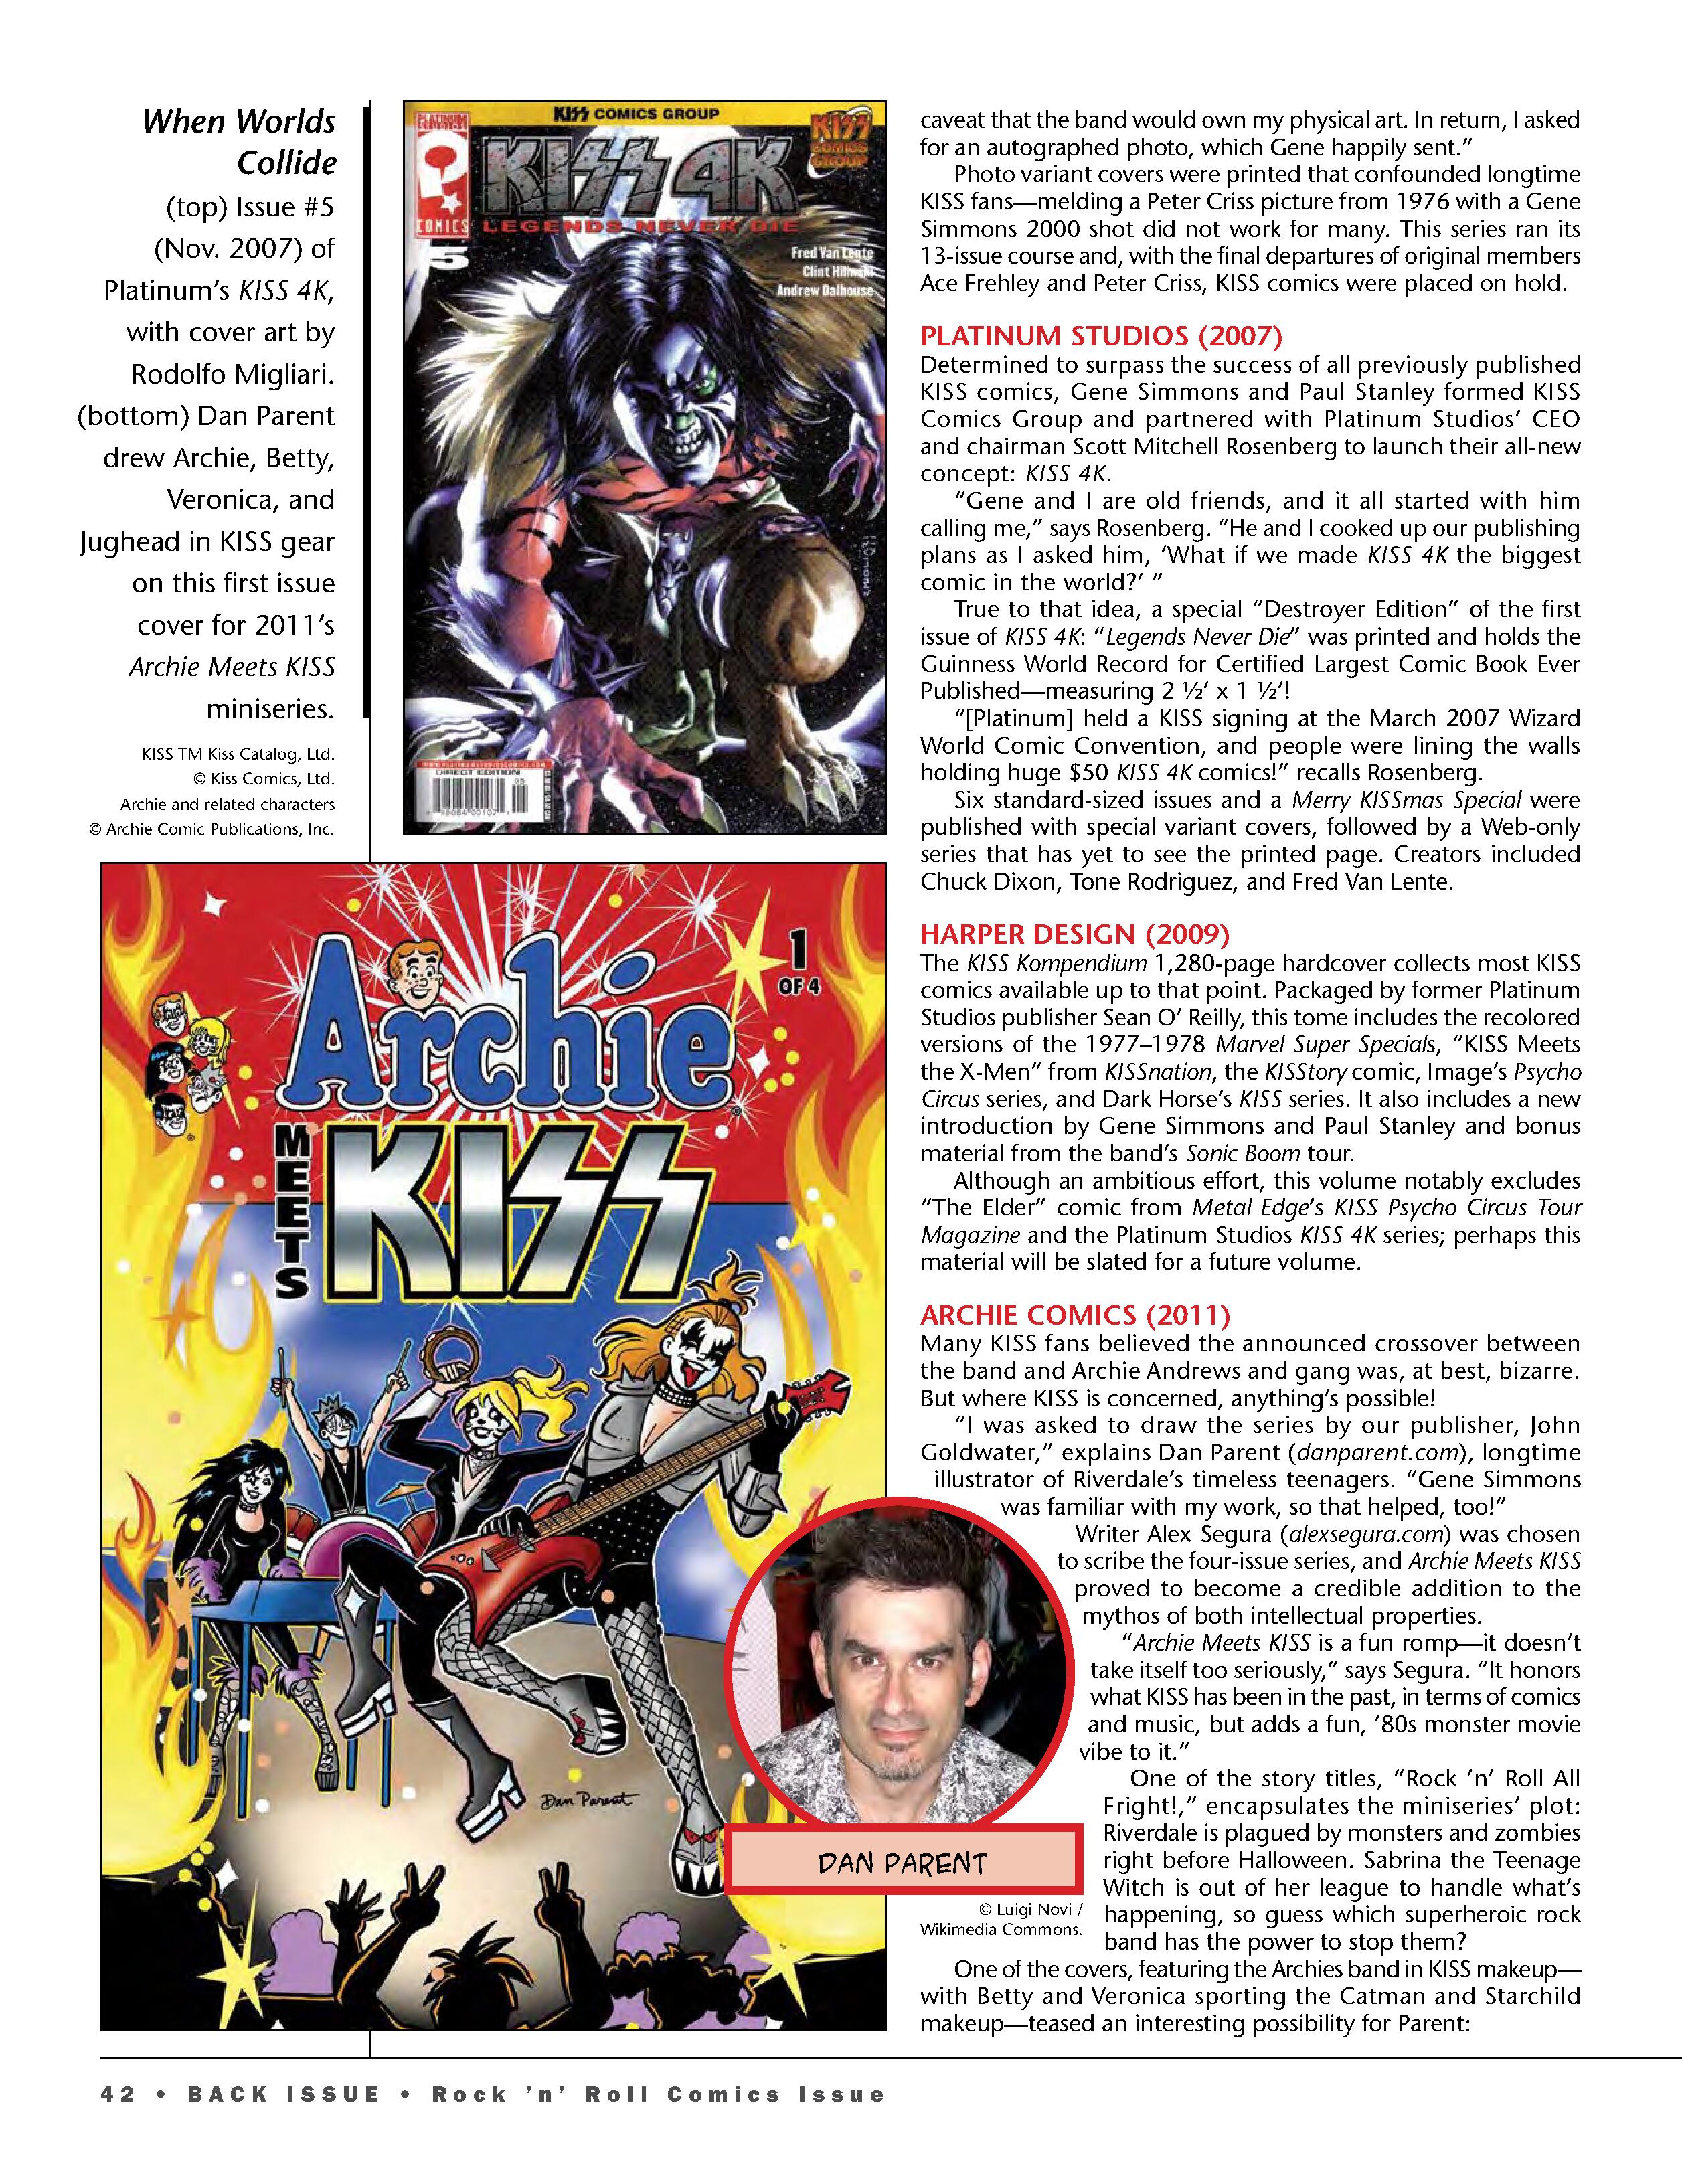 Read online Back Issue comic -  Issue #101 - 44